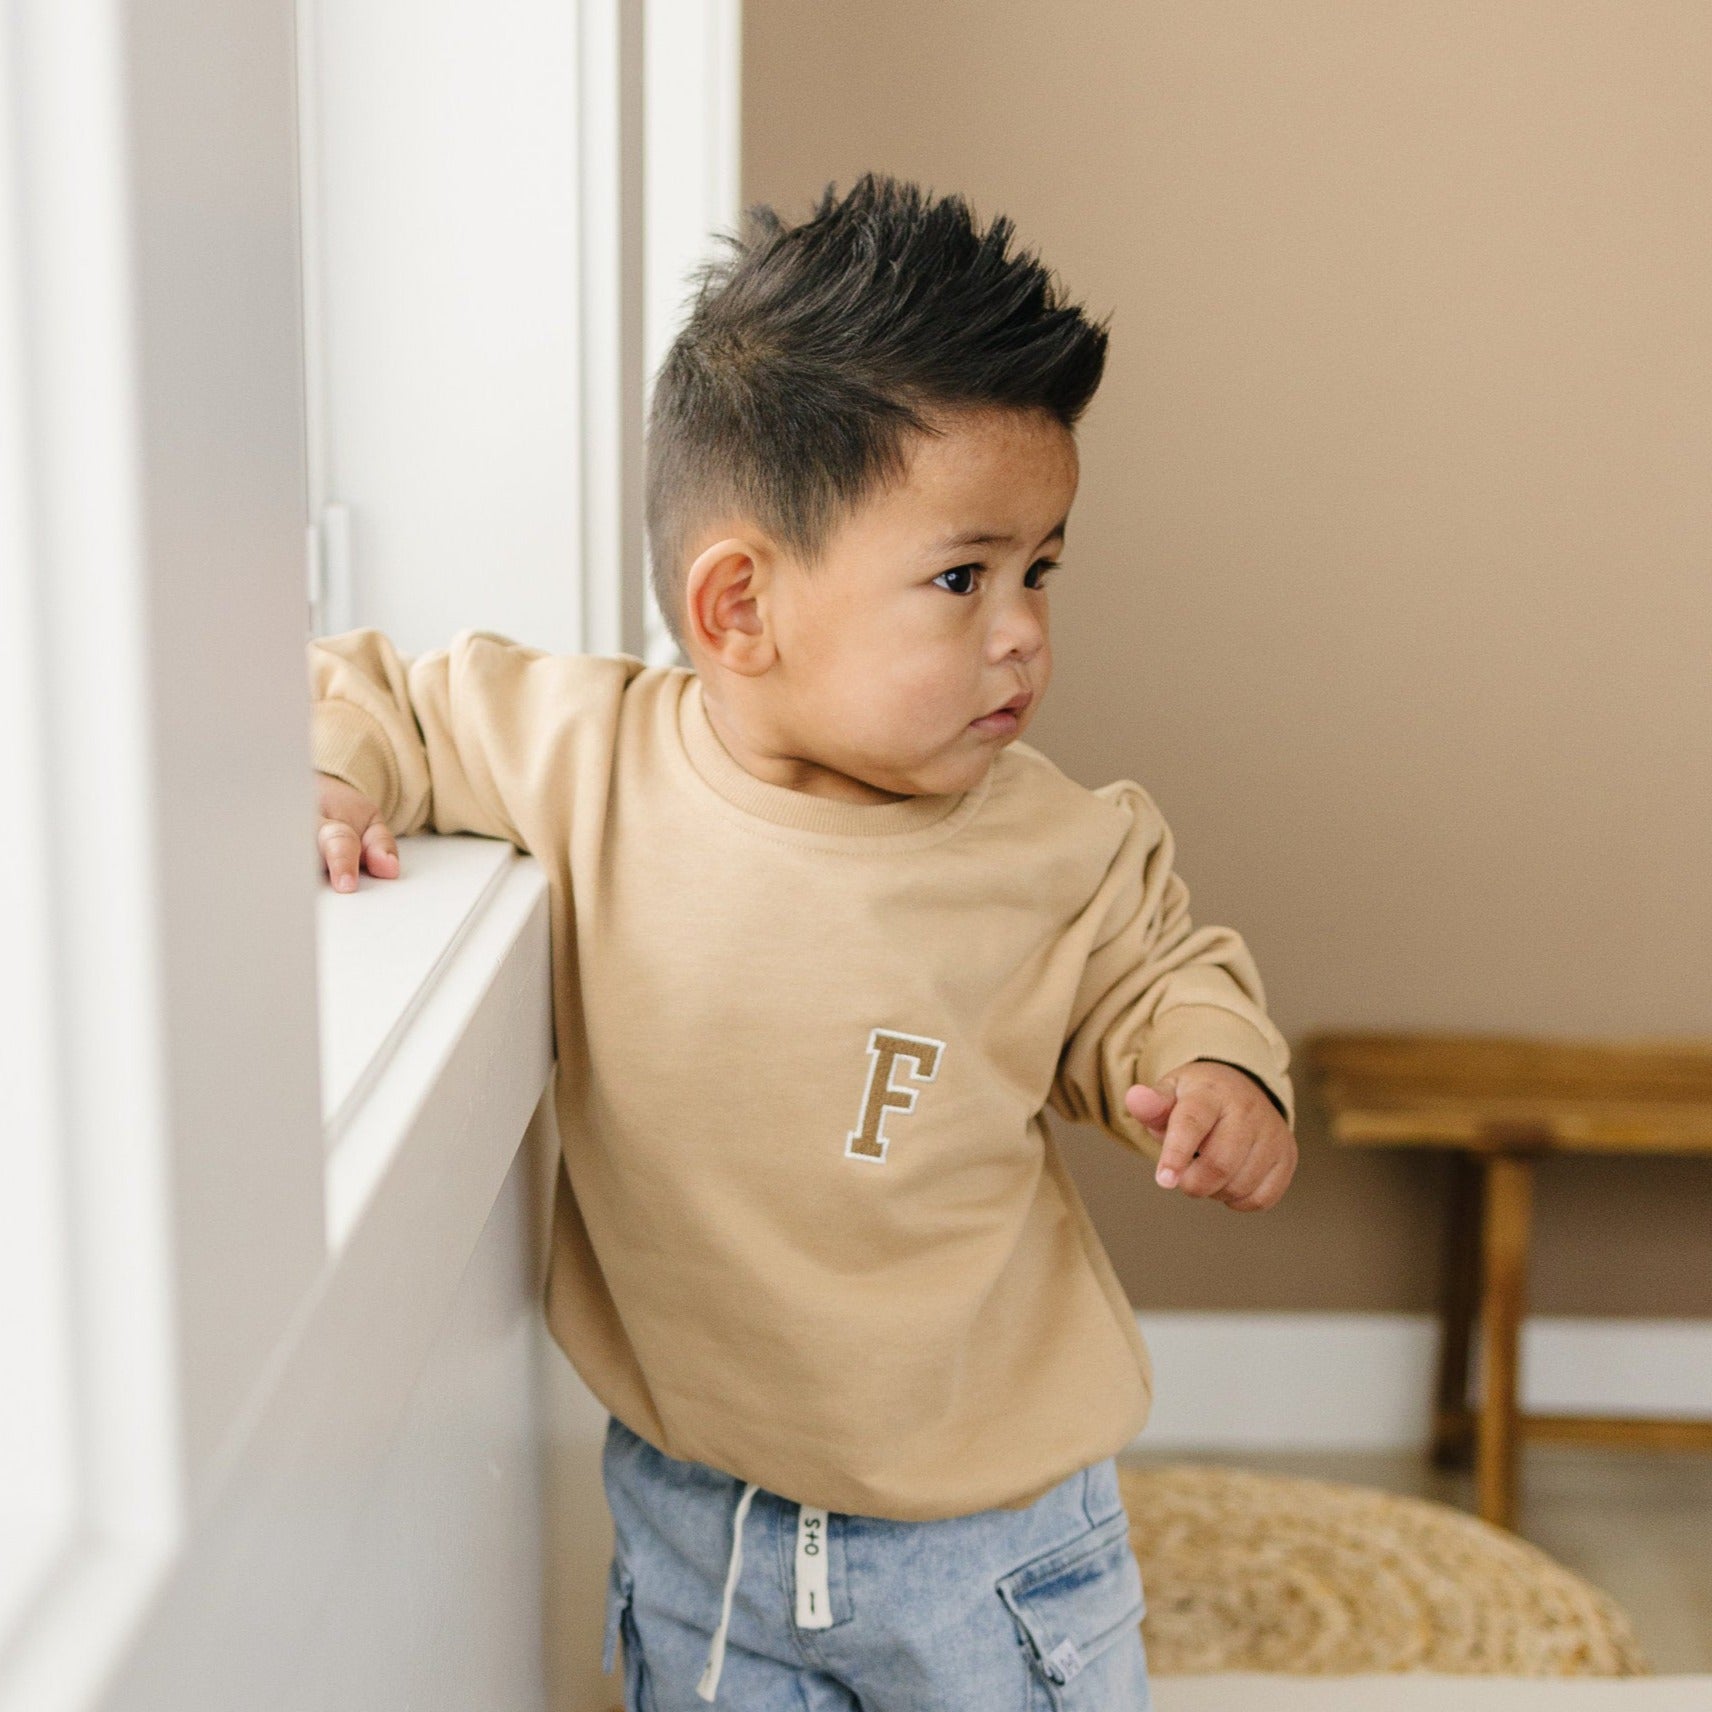 Embroidered Crewneck Sweatshirt - Personalized Crew Neck Sweatshirt - Custom Name Sweatshirt - Varsity Letter Embroidery Name - Baby Toddler